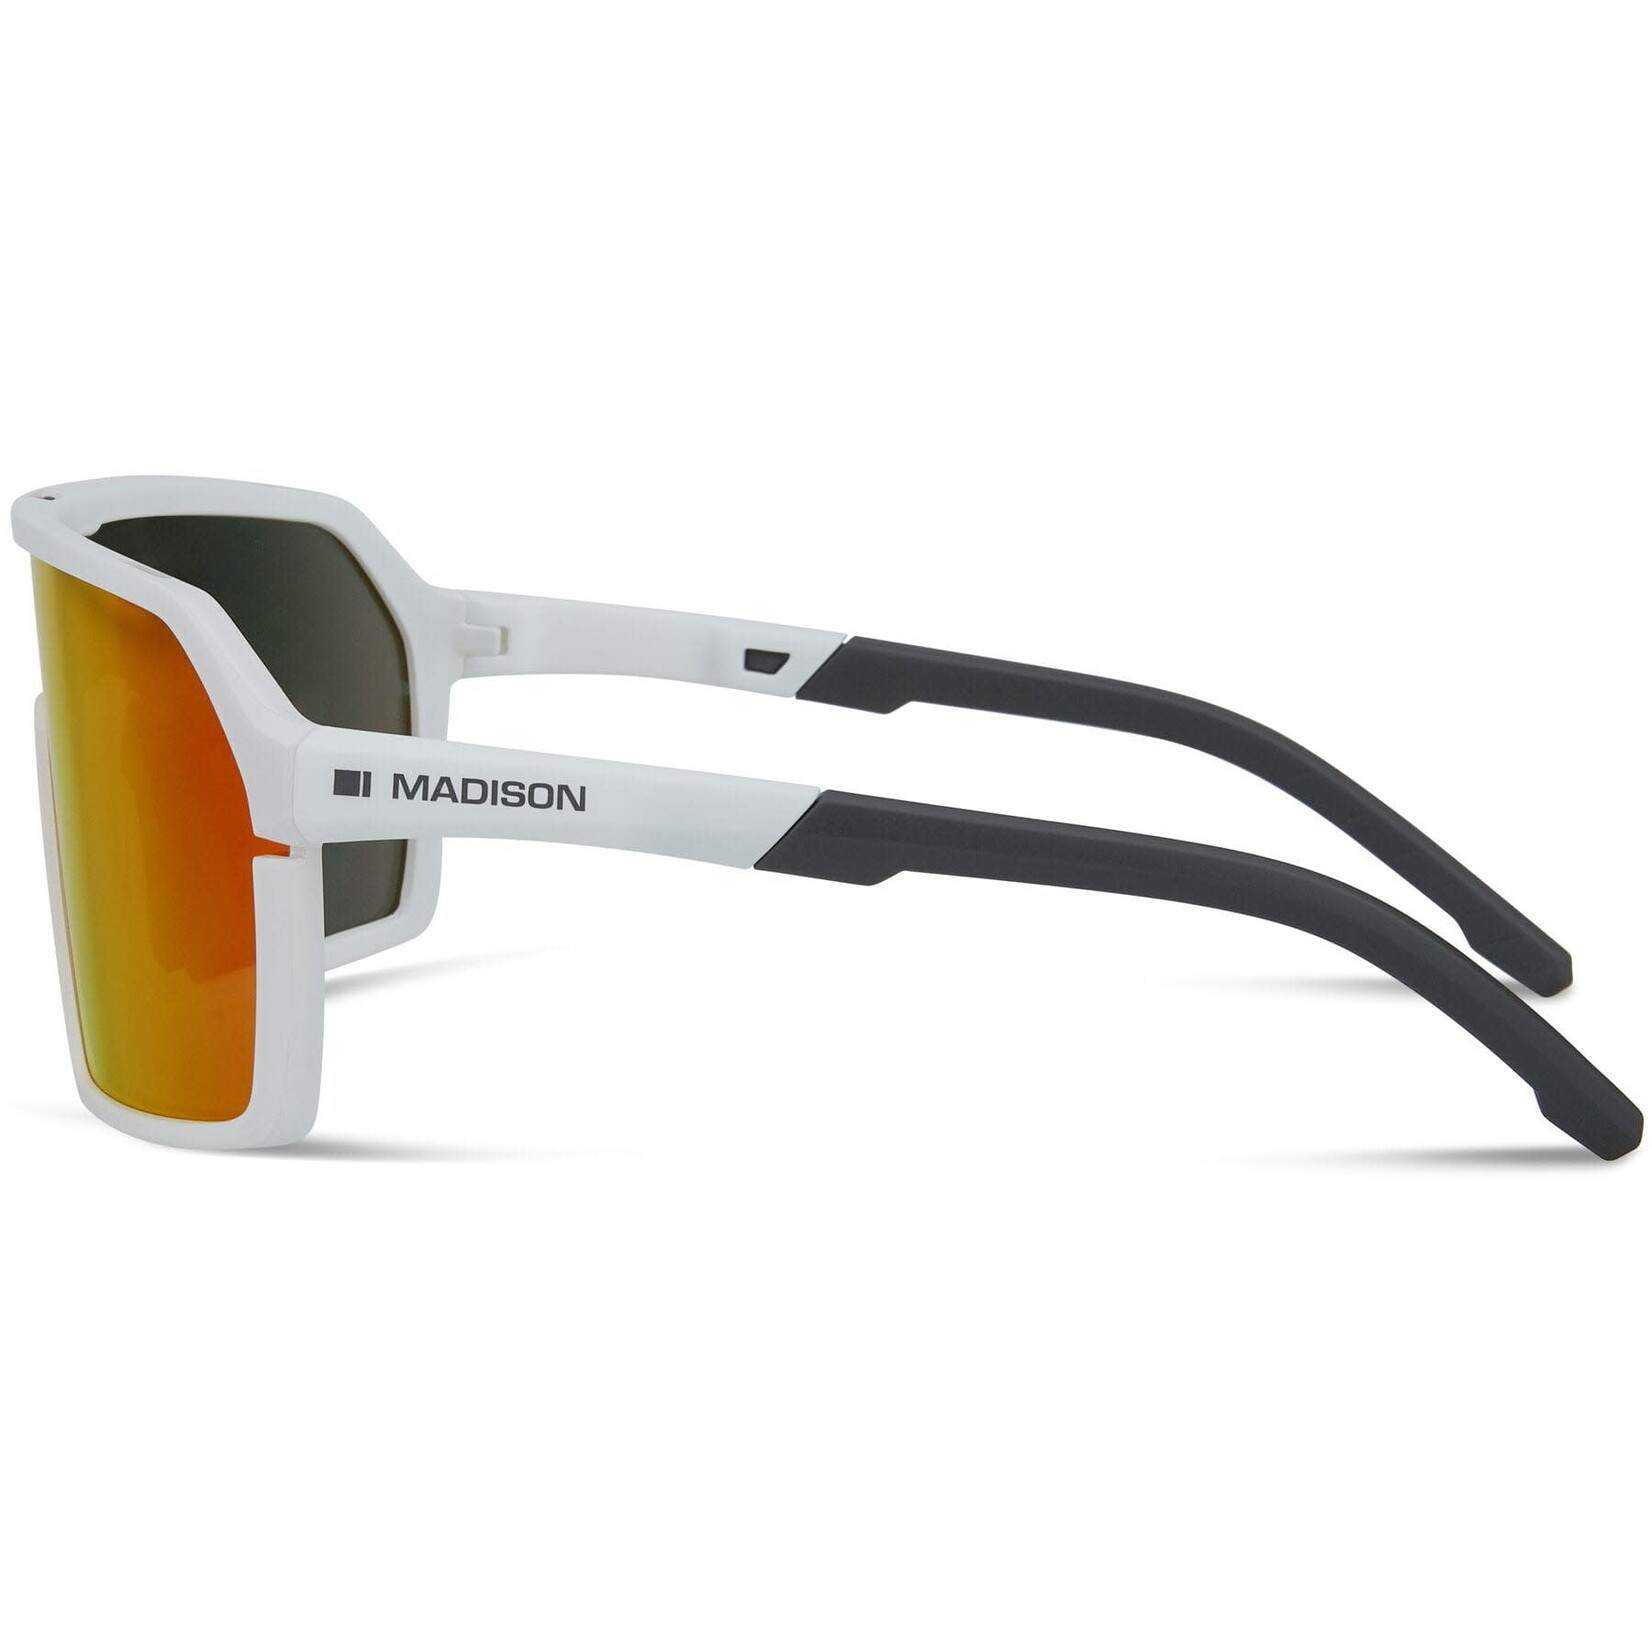 Madison Madison Crypto Glasses - 3 pack - gloss white / fire mirror / amber and clear lens Sunglasses